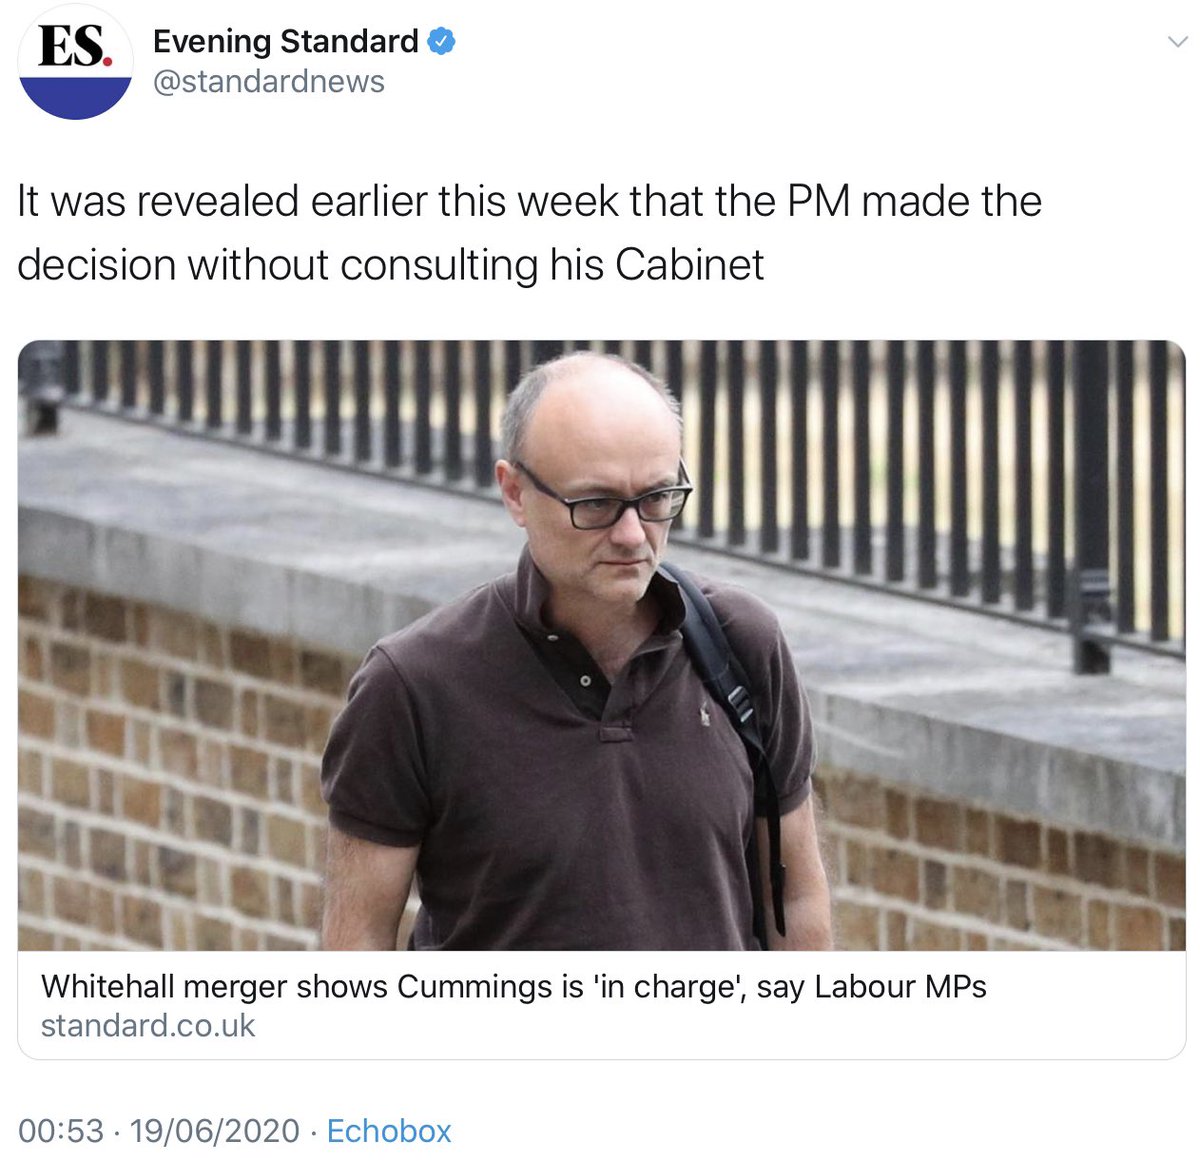 An increasing concern about current  #PM’s *accountability* to parliament, or not. Appears decision to merge  #FCO with  #DFID was taken without even consulting  #Cabinet! Be very aware.  #Constitutional conventions are being steadily undermined.[ image  https://twitter.com/standardnews/status/1273765878358777856?s=21]  https://twitter.com/CharterhouseSq/status/1273000334898737152